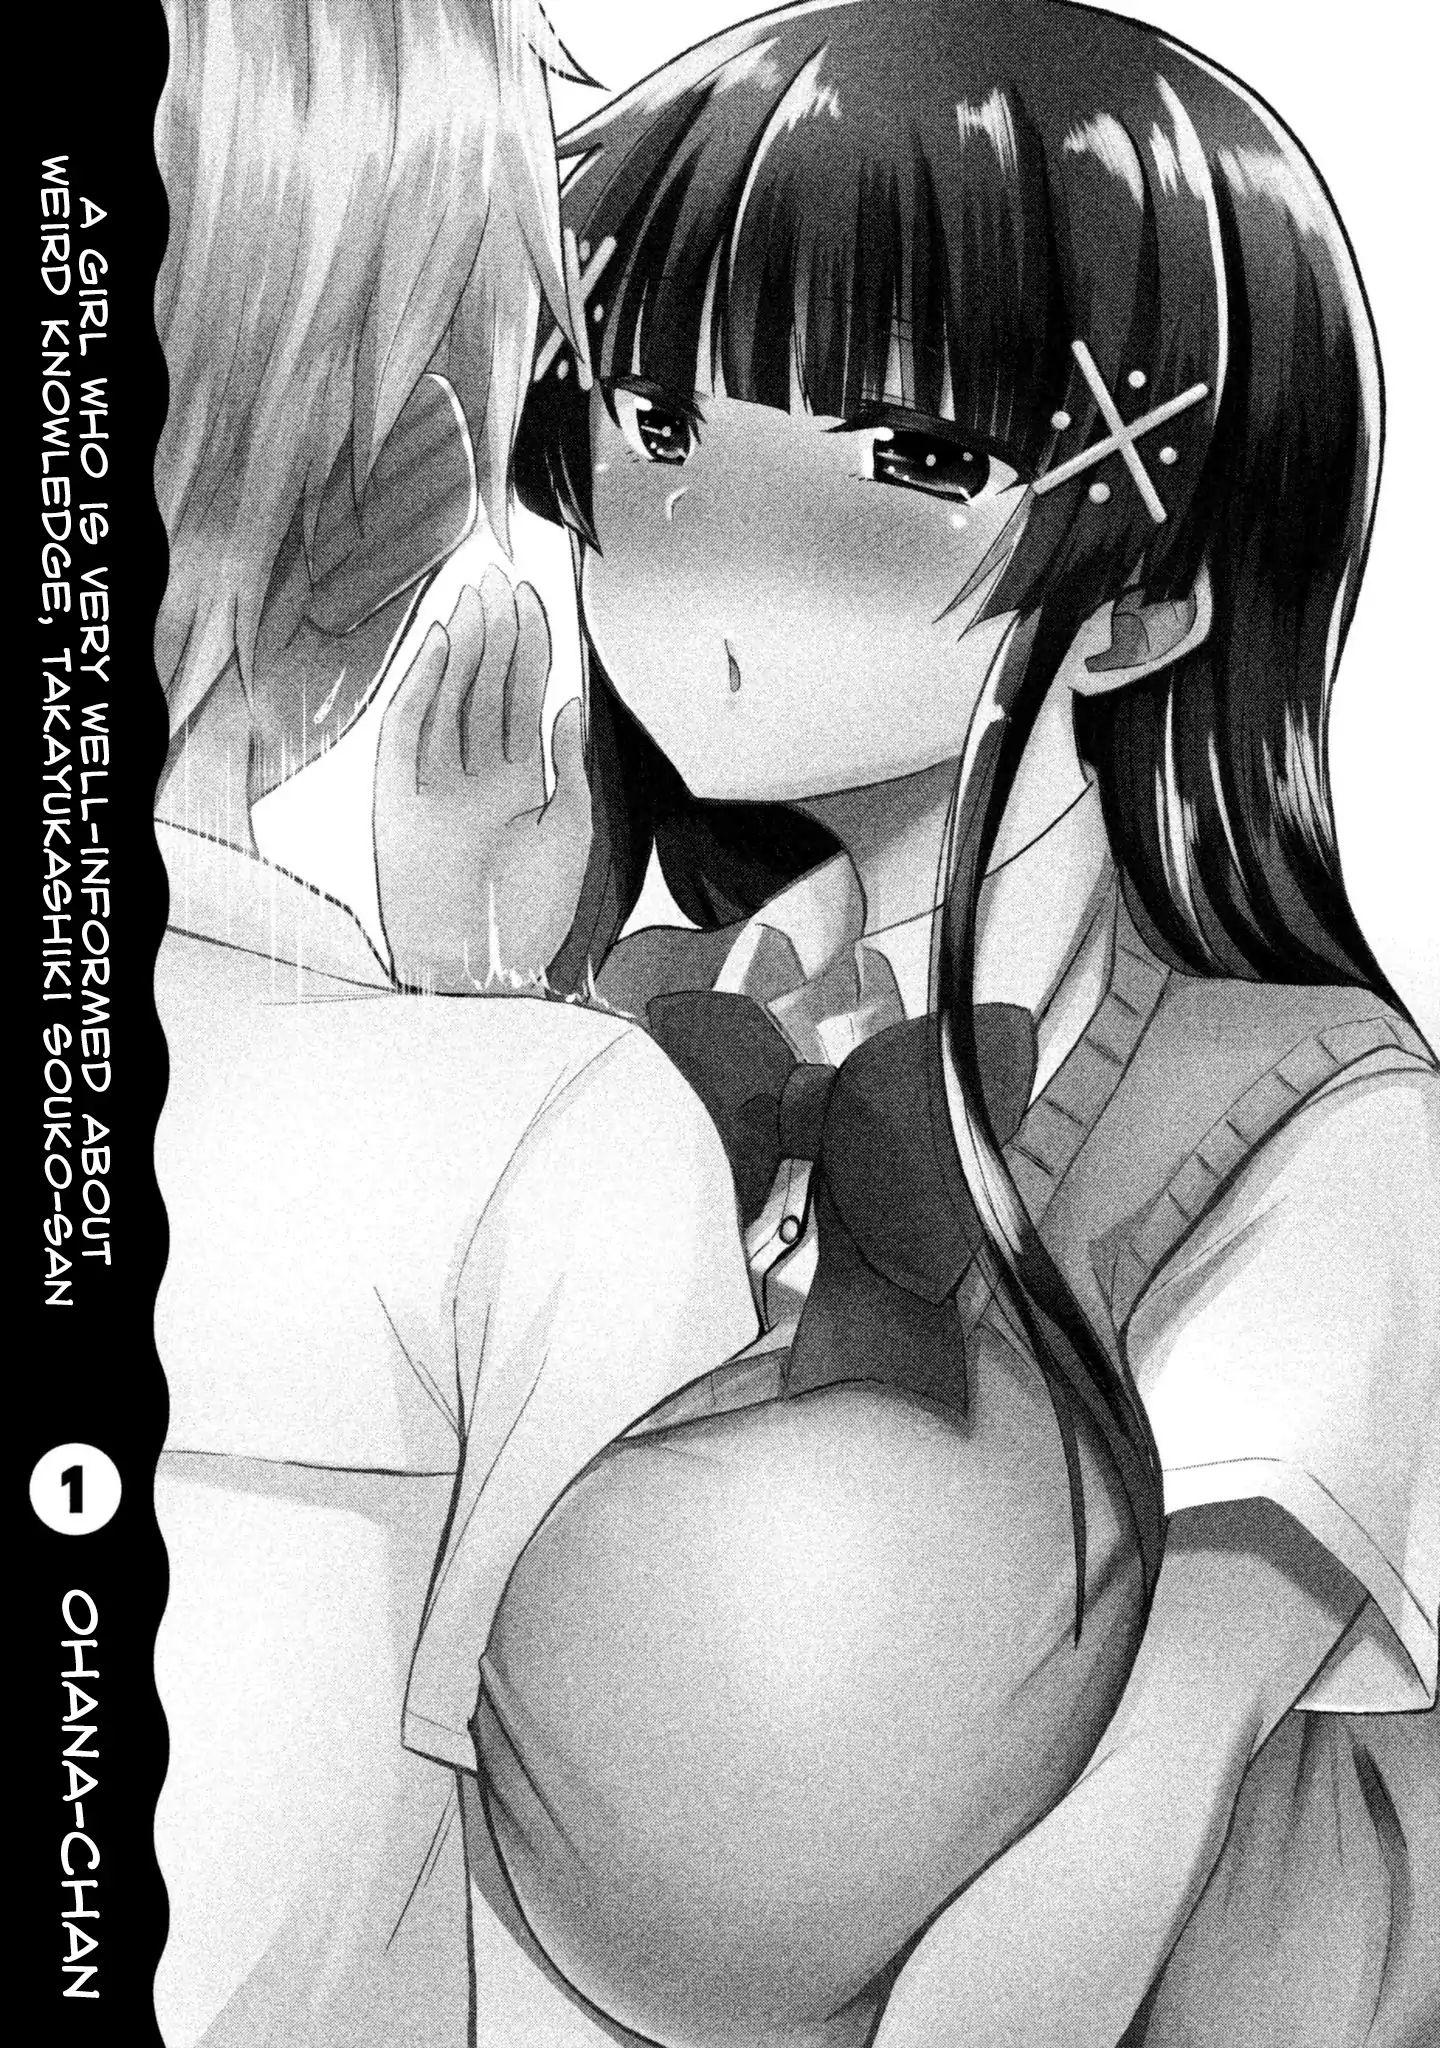 A Girl Who Is Very Well-Informed About Weird Knowledge, Takayukashiki Souko-San Vol.1 Chapter 1: Chest page 4 - Mangakakalots.com